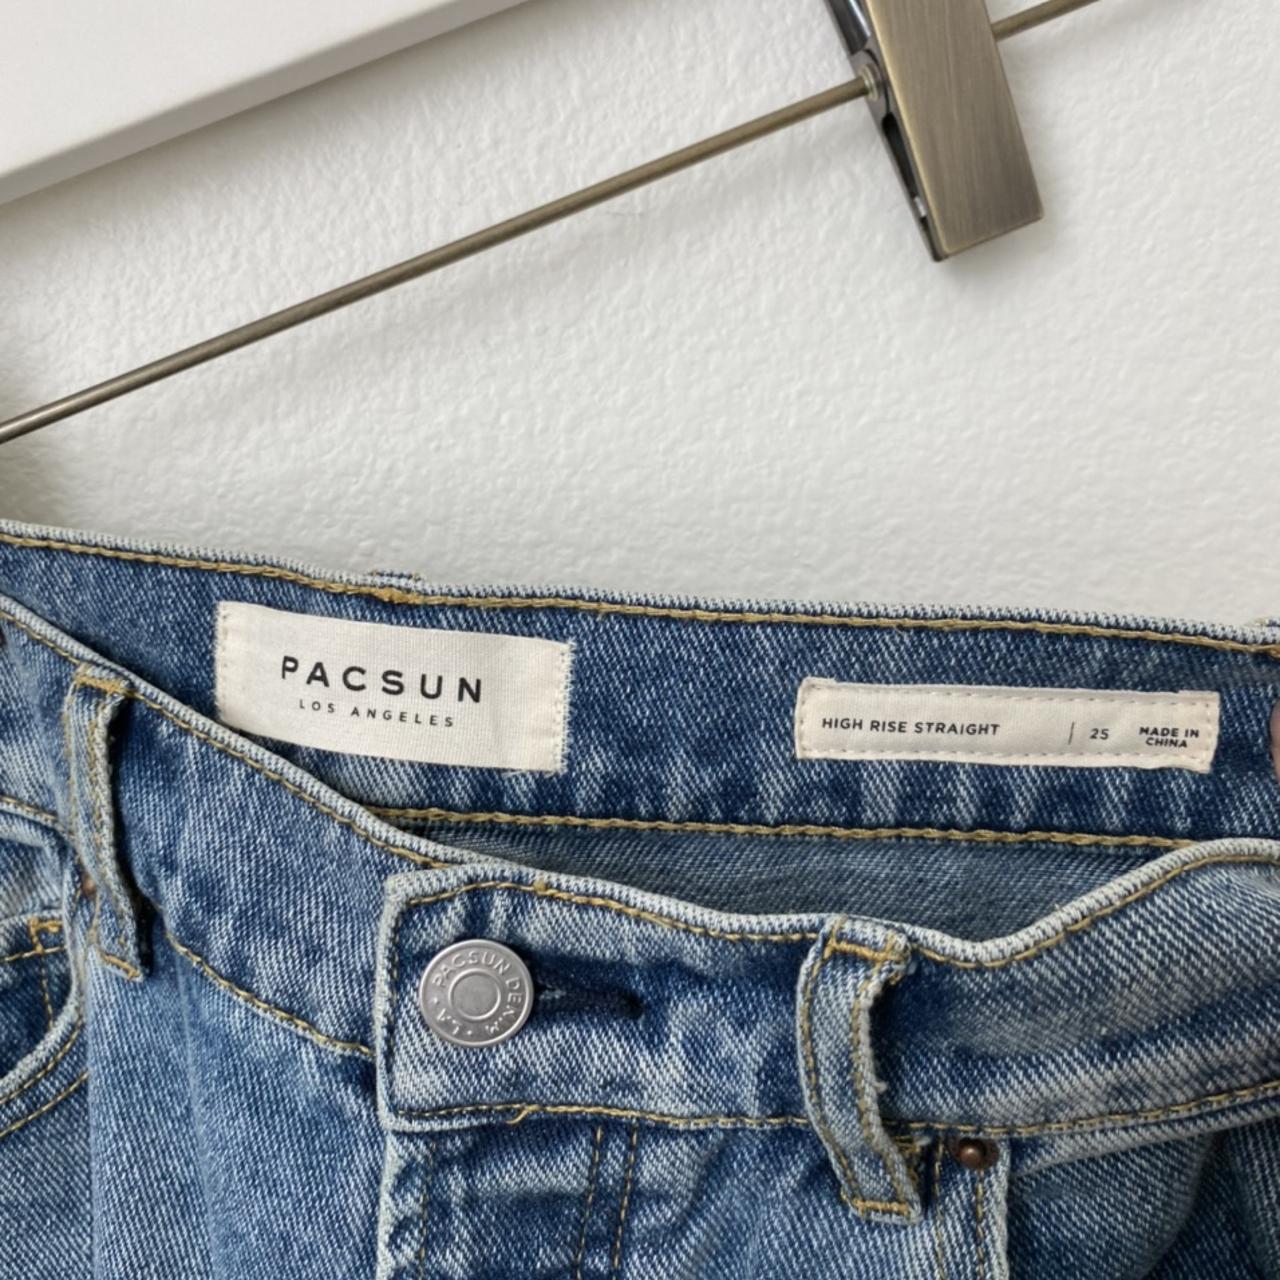 Product Image 2 - Like new #Pacsun high rise